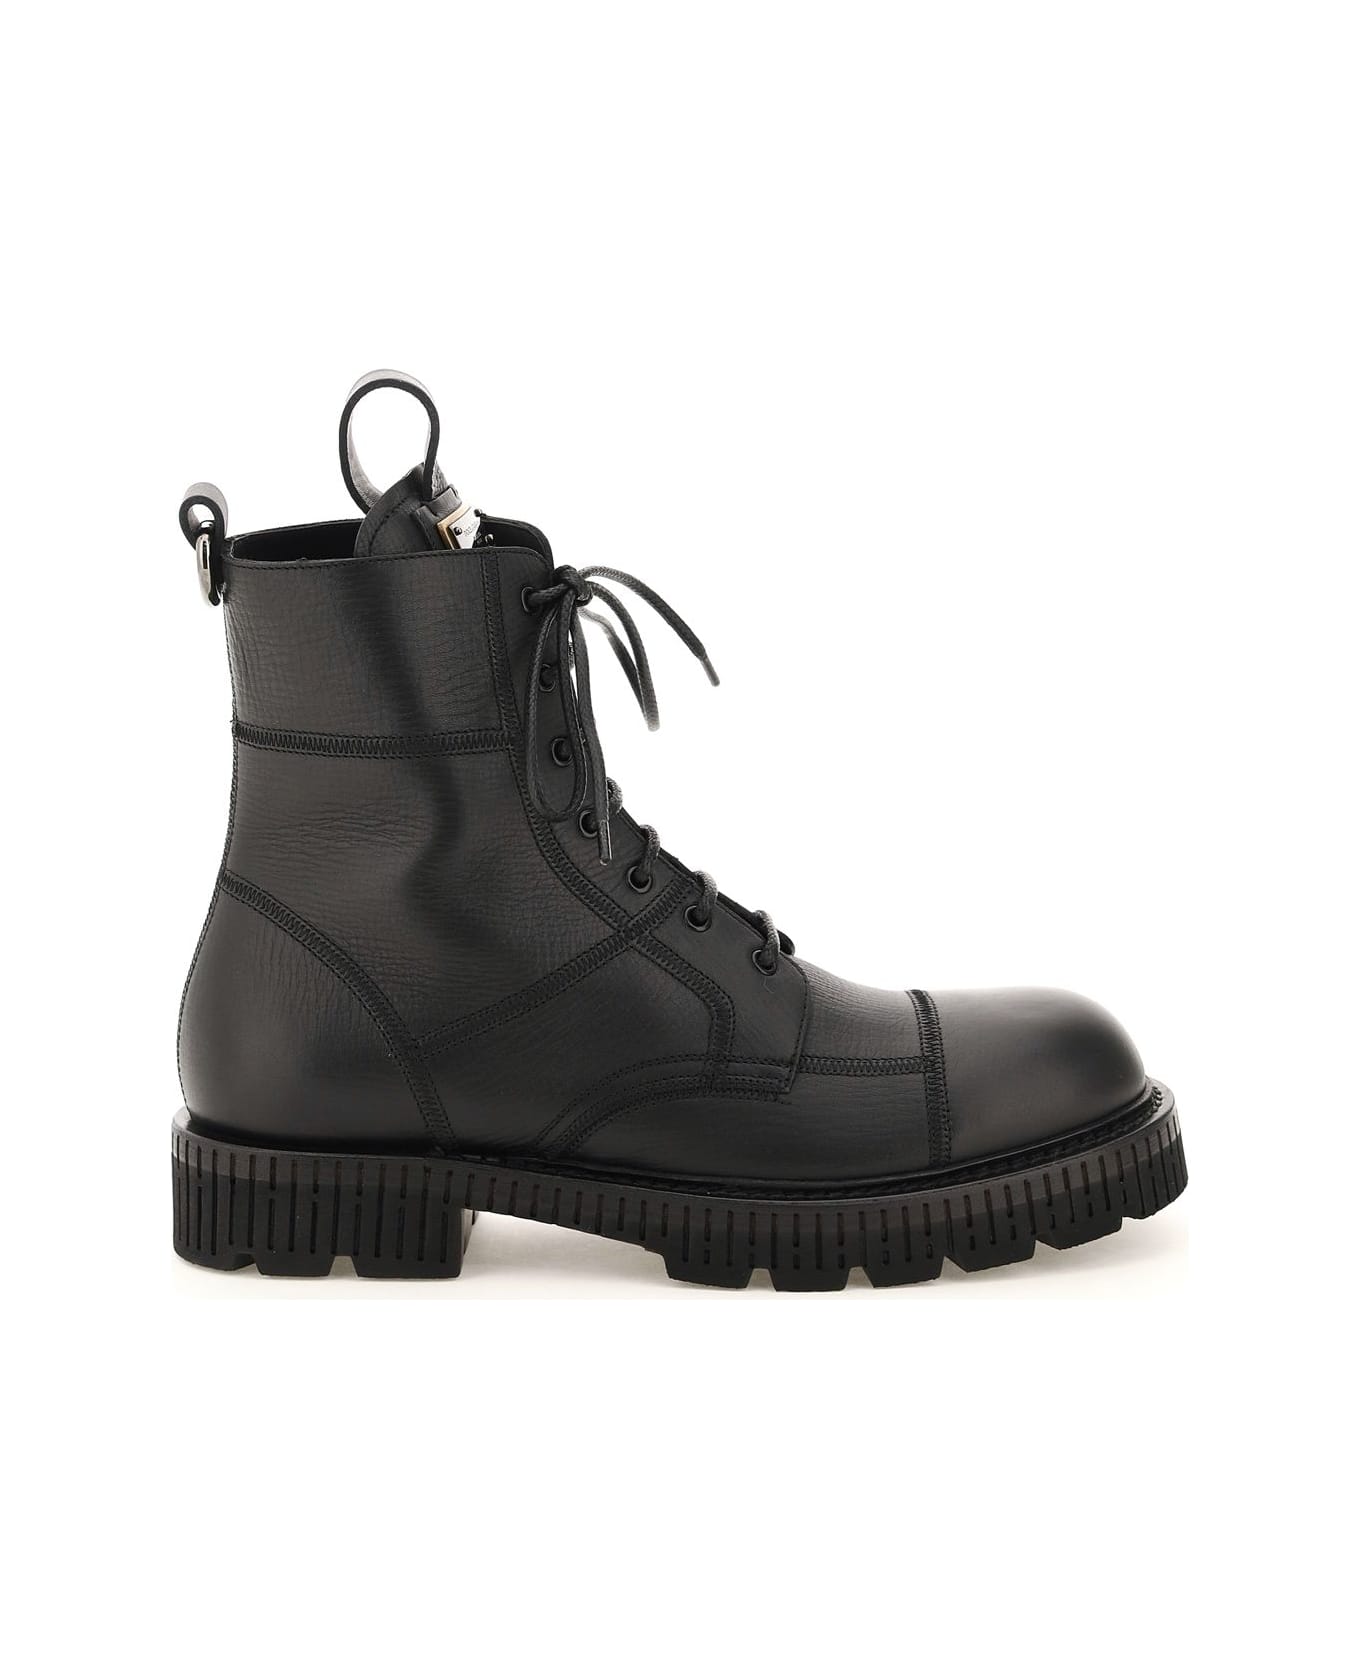 Dolce & Gabbana Leather Lace Up Boots - Black ブーツ